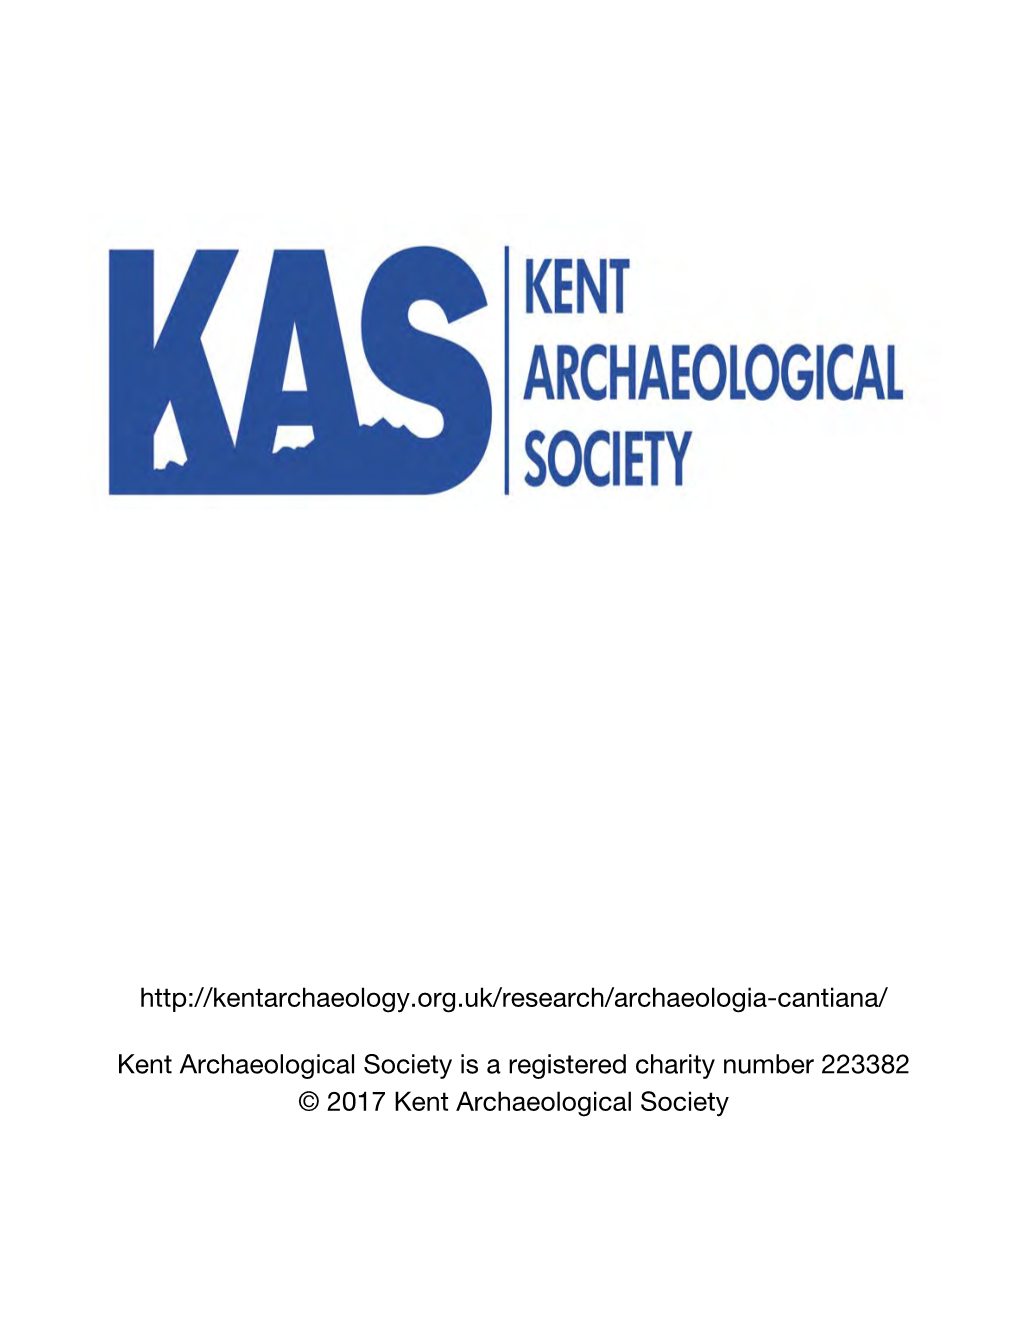 Annual Bibliography of Kentish Archaeology and History 2009